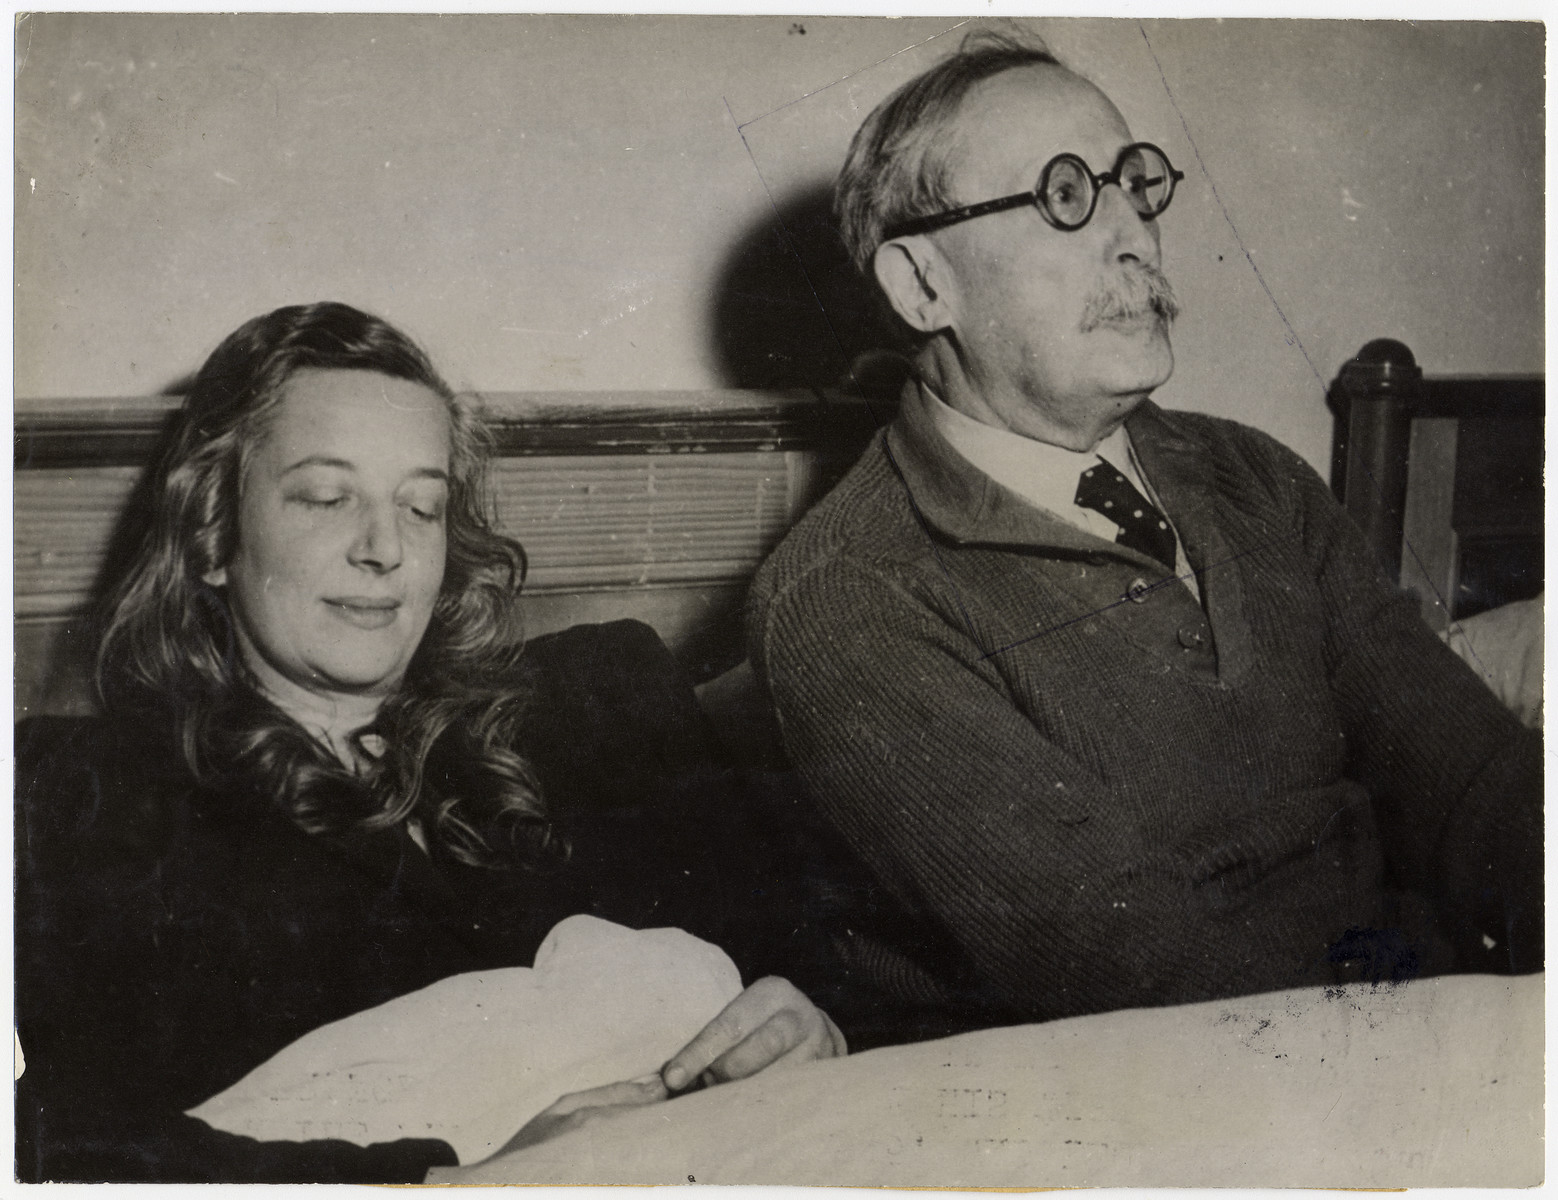 Portrait of former French Prime Minister Leon Blum and his wife, following their liberation.

Original caption reads: "Among the famous personalities freed by Allied troops from the German concentration camp at Lago di Braies in the Alps, in Italy, on May 4, 1945, was Leon Bloom, former Prime Minister of France, who is shown with his wife at the camp. Blum disclosed that he had been a prisoner in France until March, 1943, when the Gestapo took him to Germany with Deladier and General Gamelin. Confined at Buchenwald, he was guarded by 20 SS men with especially trained police dogs. Later he was taken to the Alpine camp for perpetual confinement, without having a trial. Although suffering from lumbago and bronchitits, Blum shook hands energetically with his Liberators. During five years of imprisonment, Blum and his wife listened secretely to BBO broadcasts."